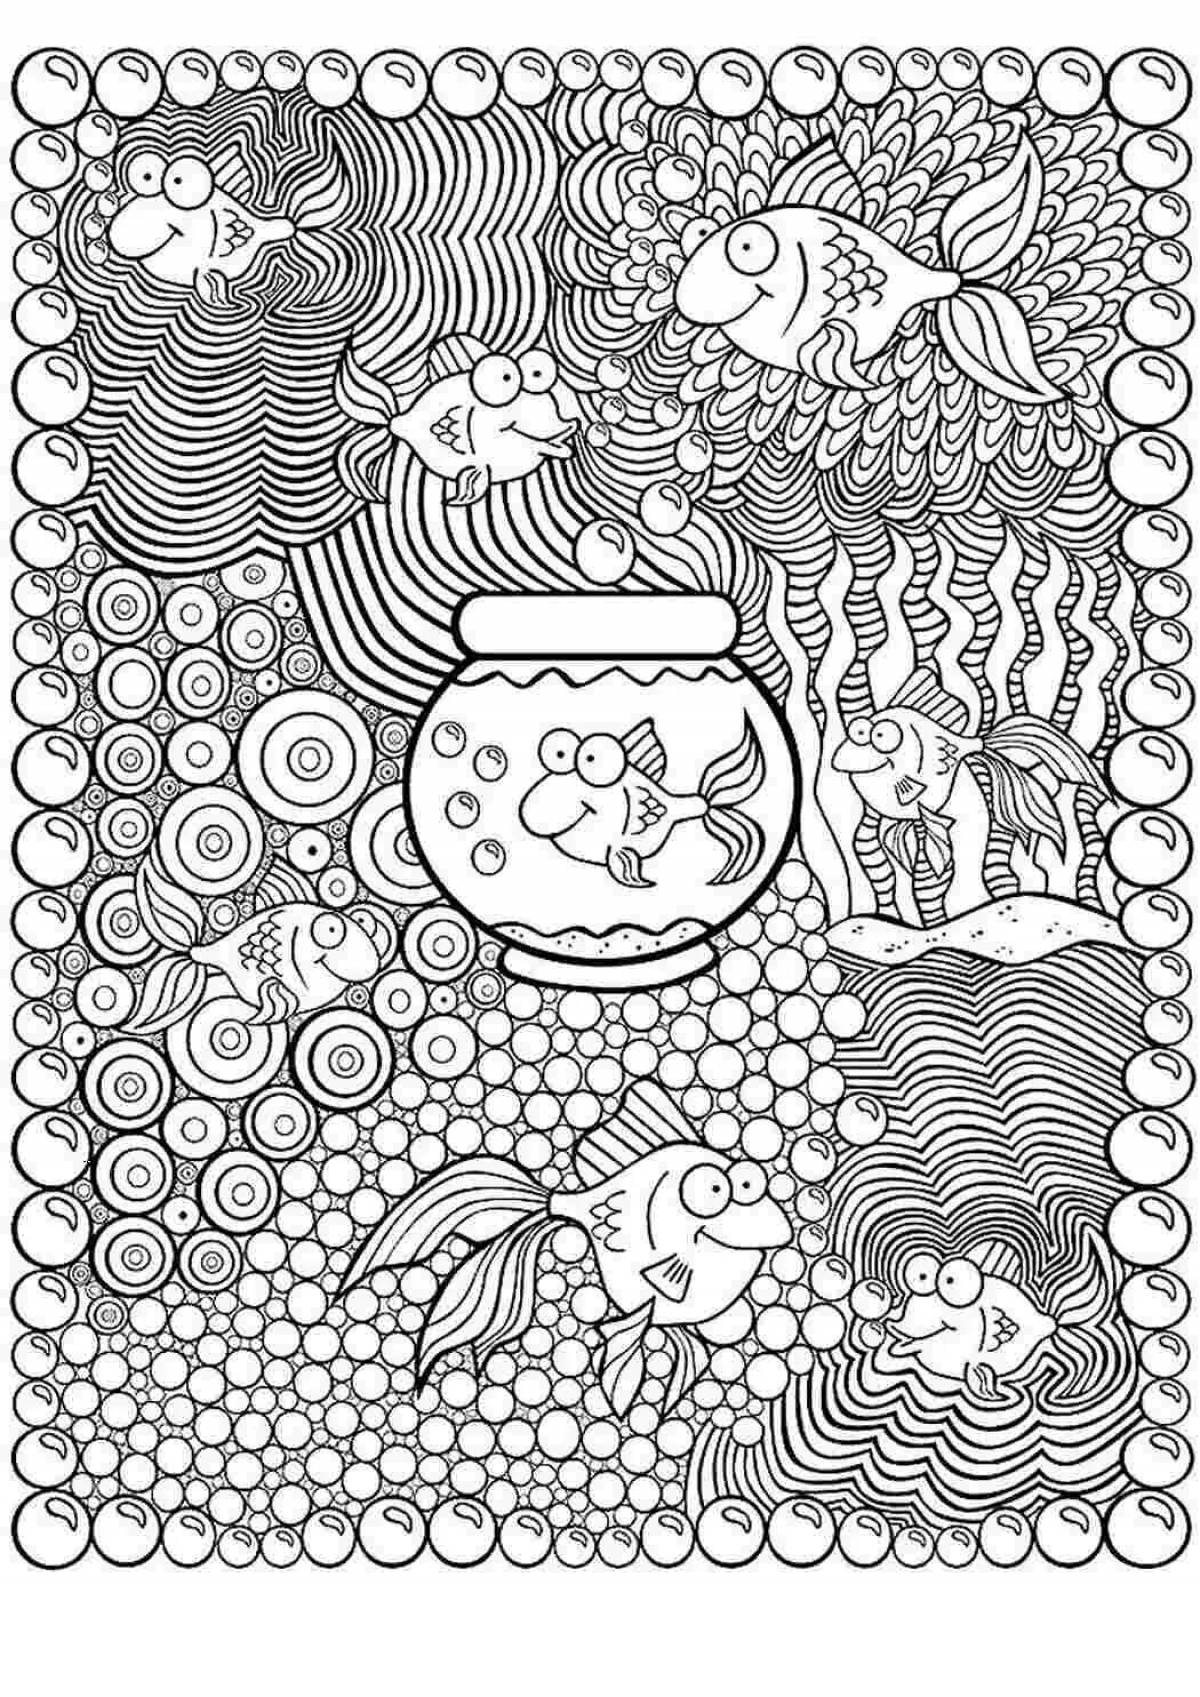 Great relaxation coloring book for kids